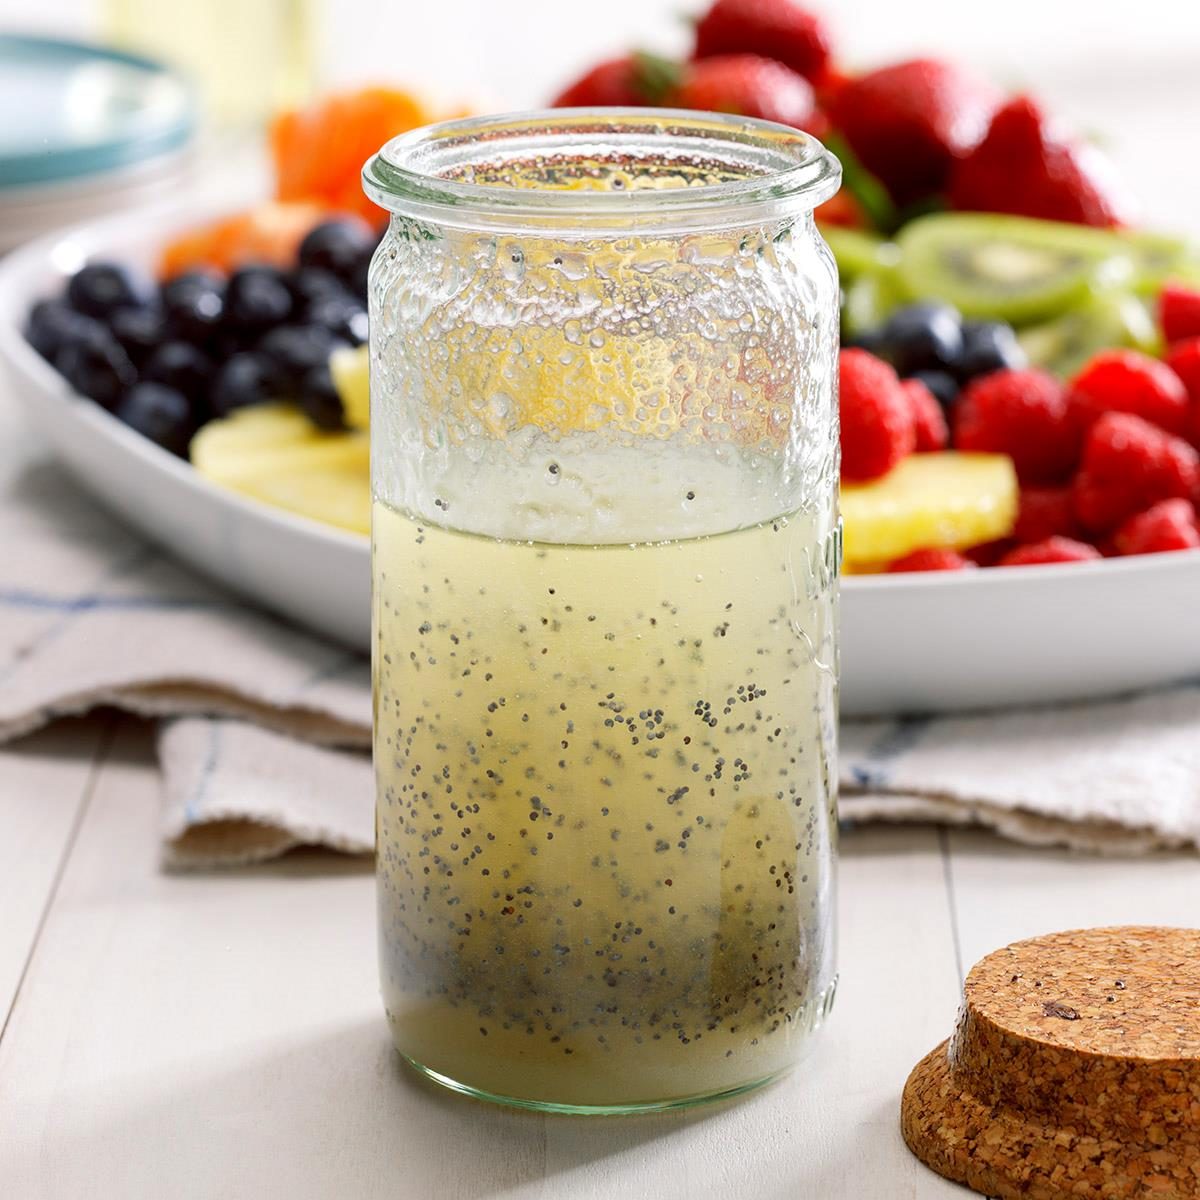 Poppy Seed Dressing Recipe: How to Make It